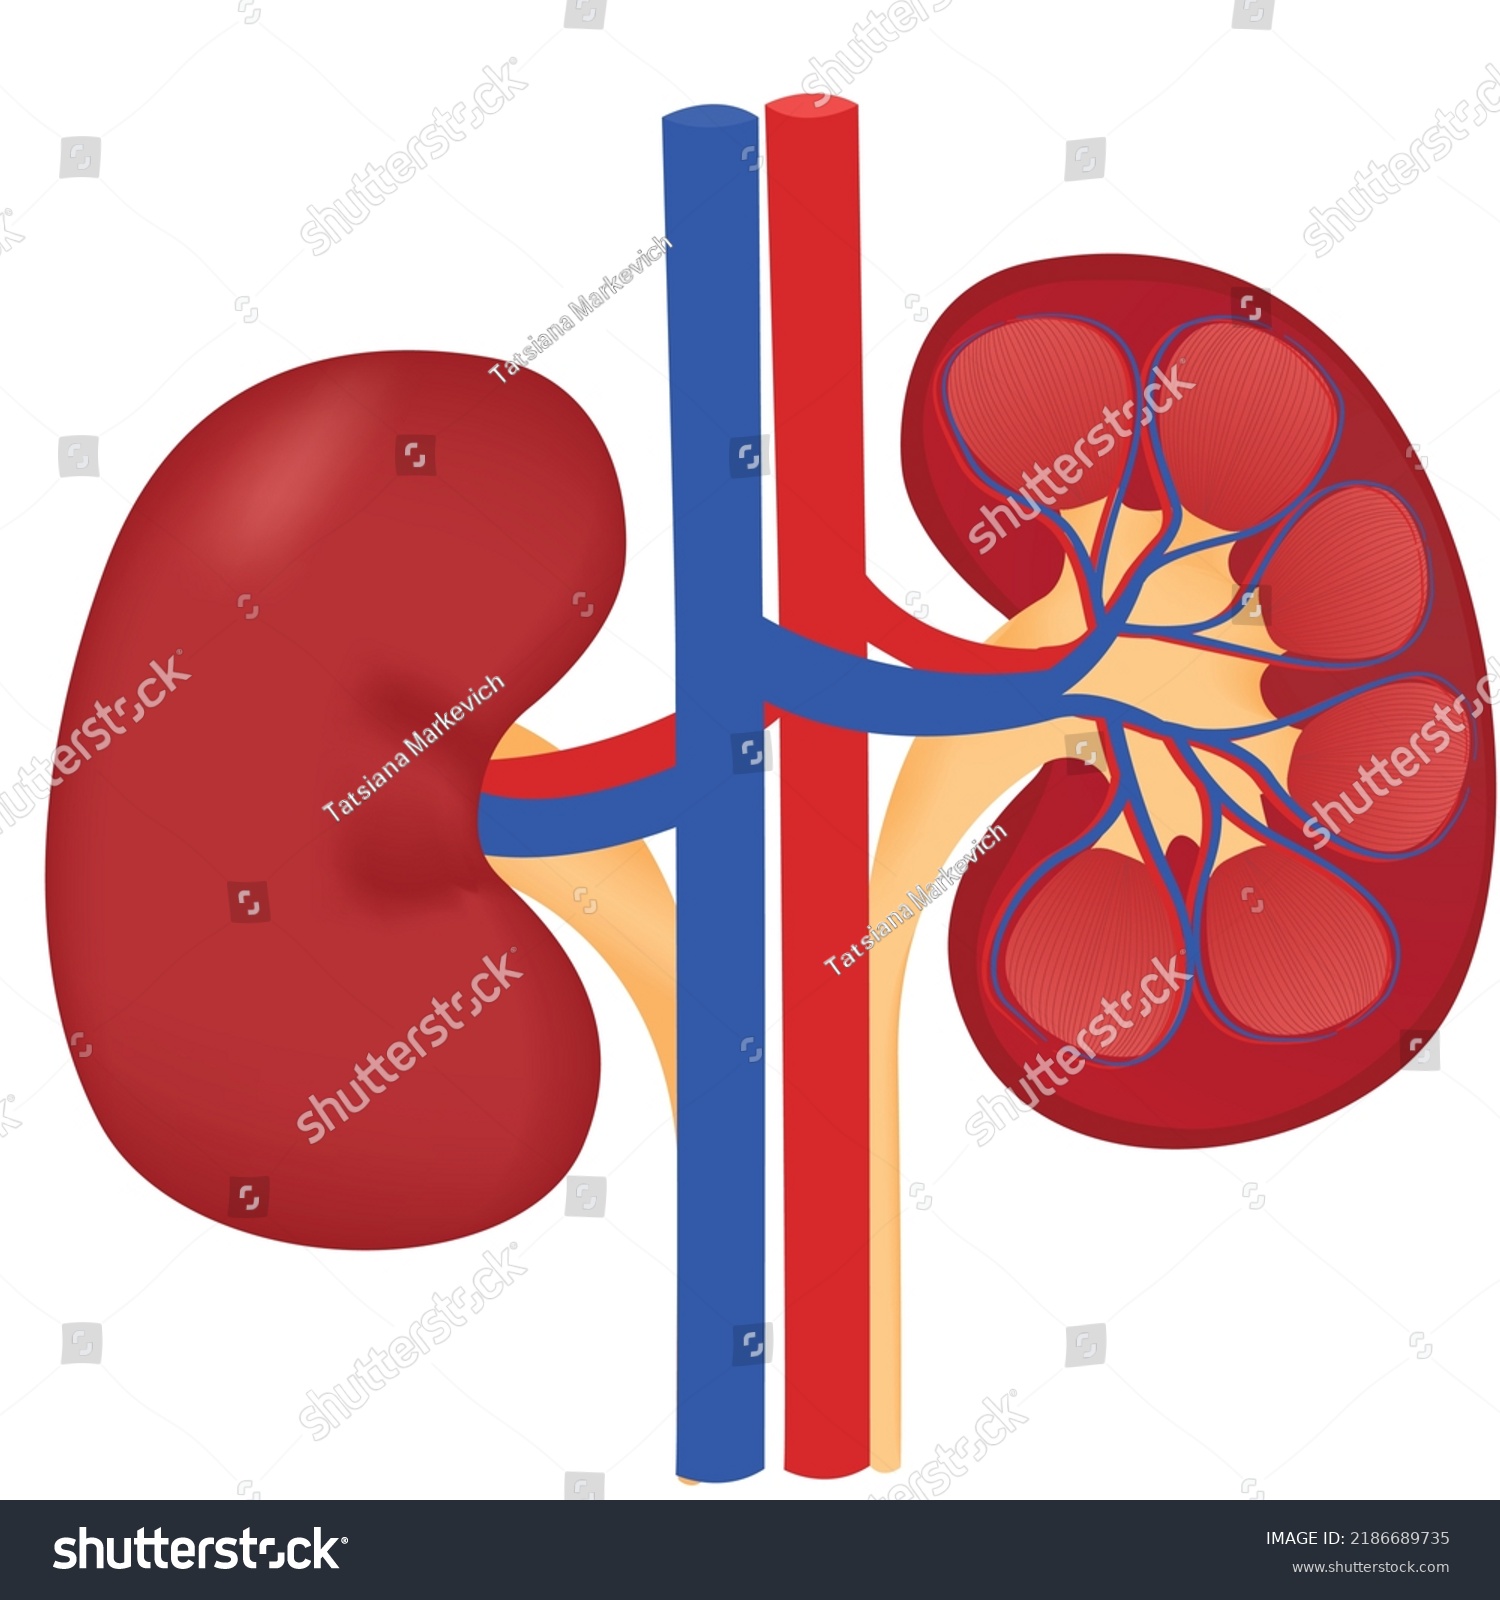 Anatomy Kidney Without Pointers Vector Illustration Stock Vector ...